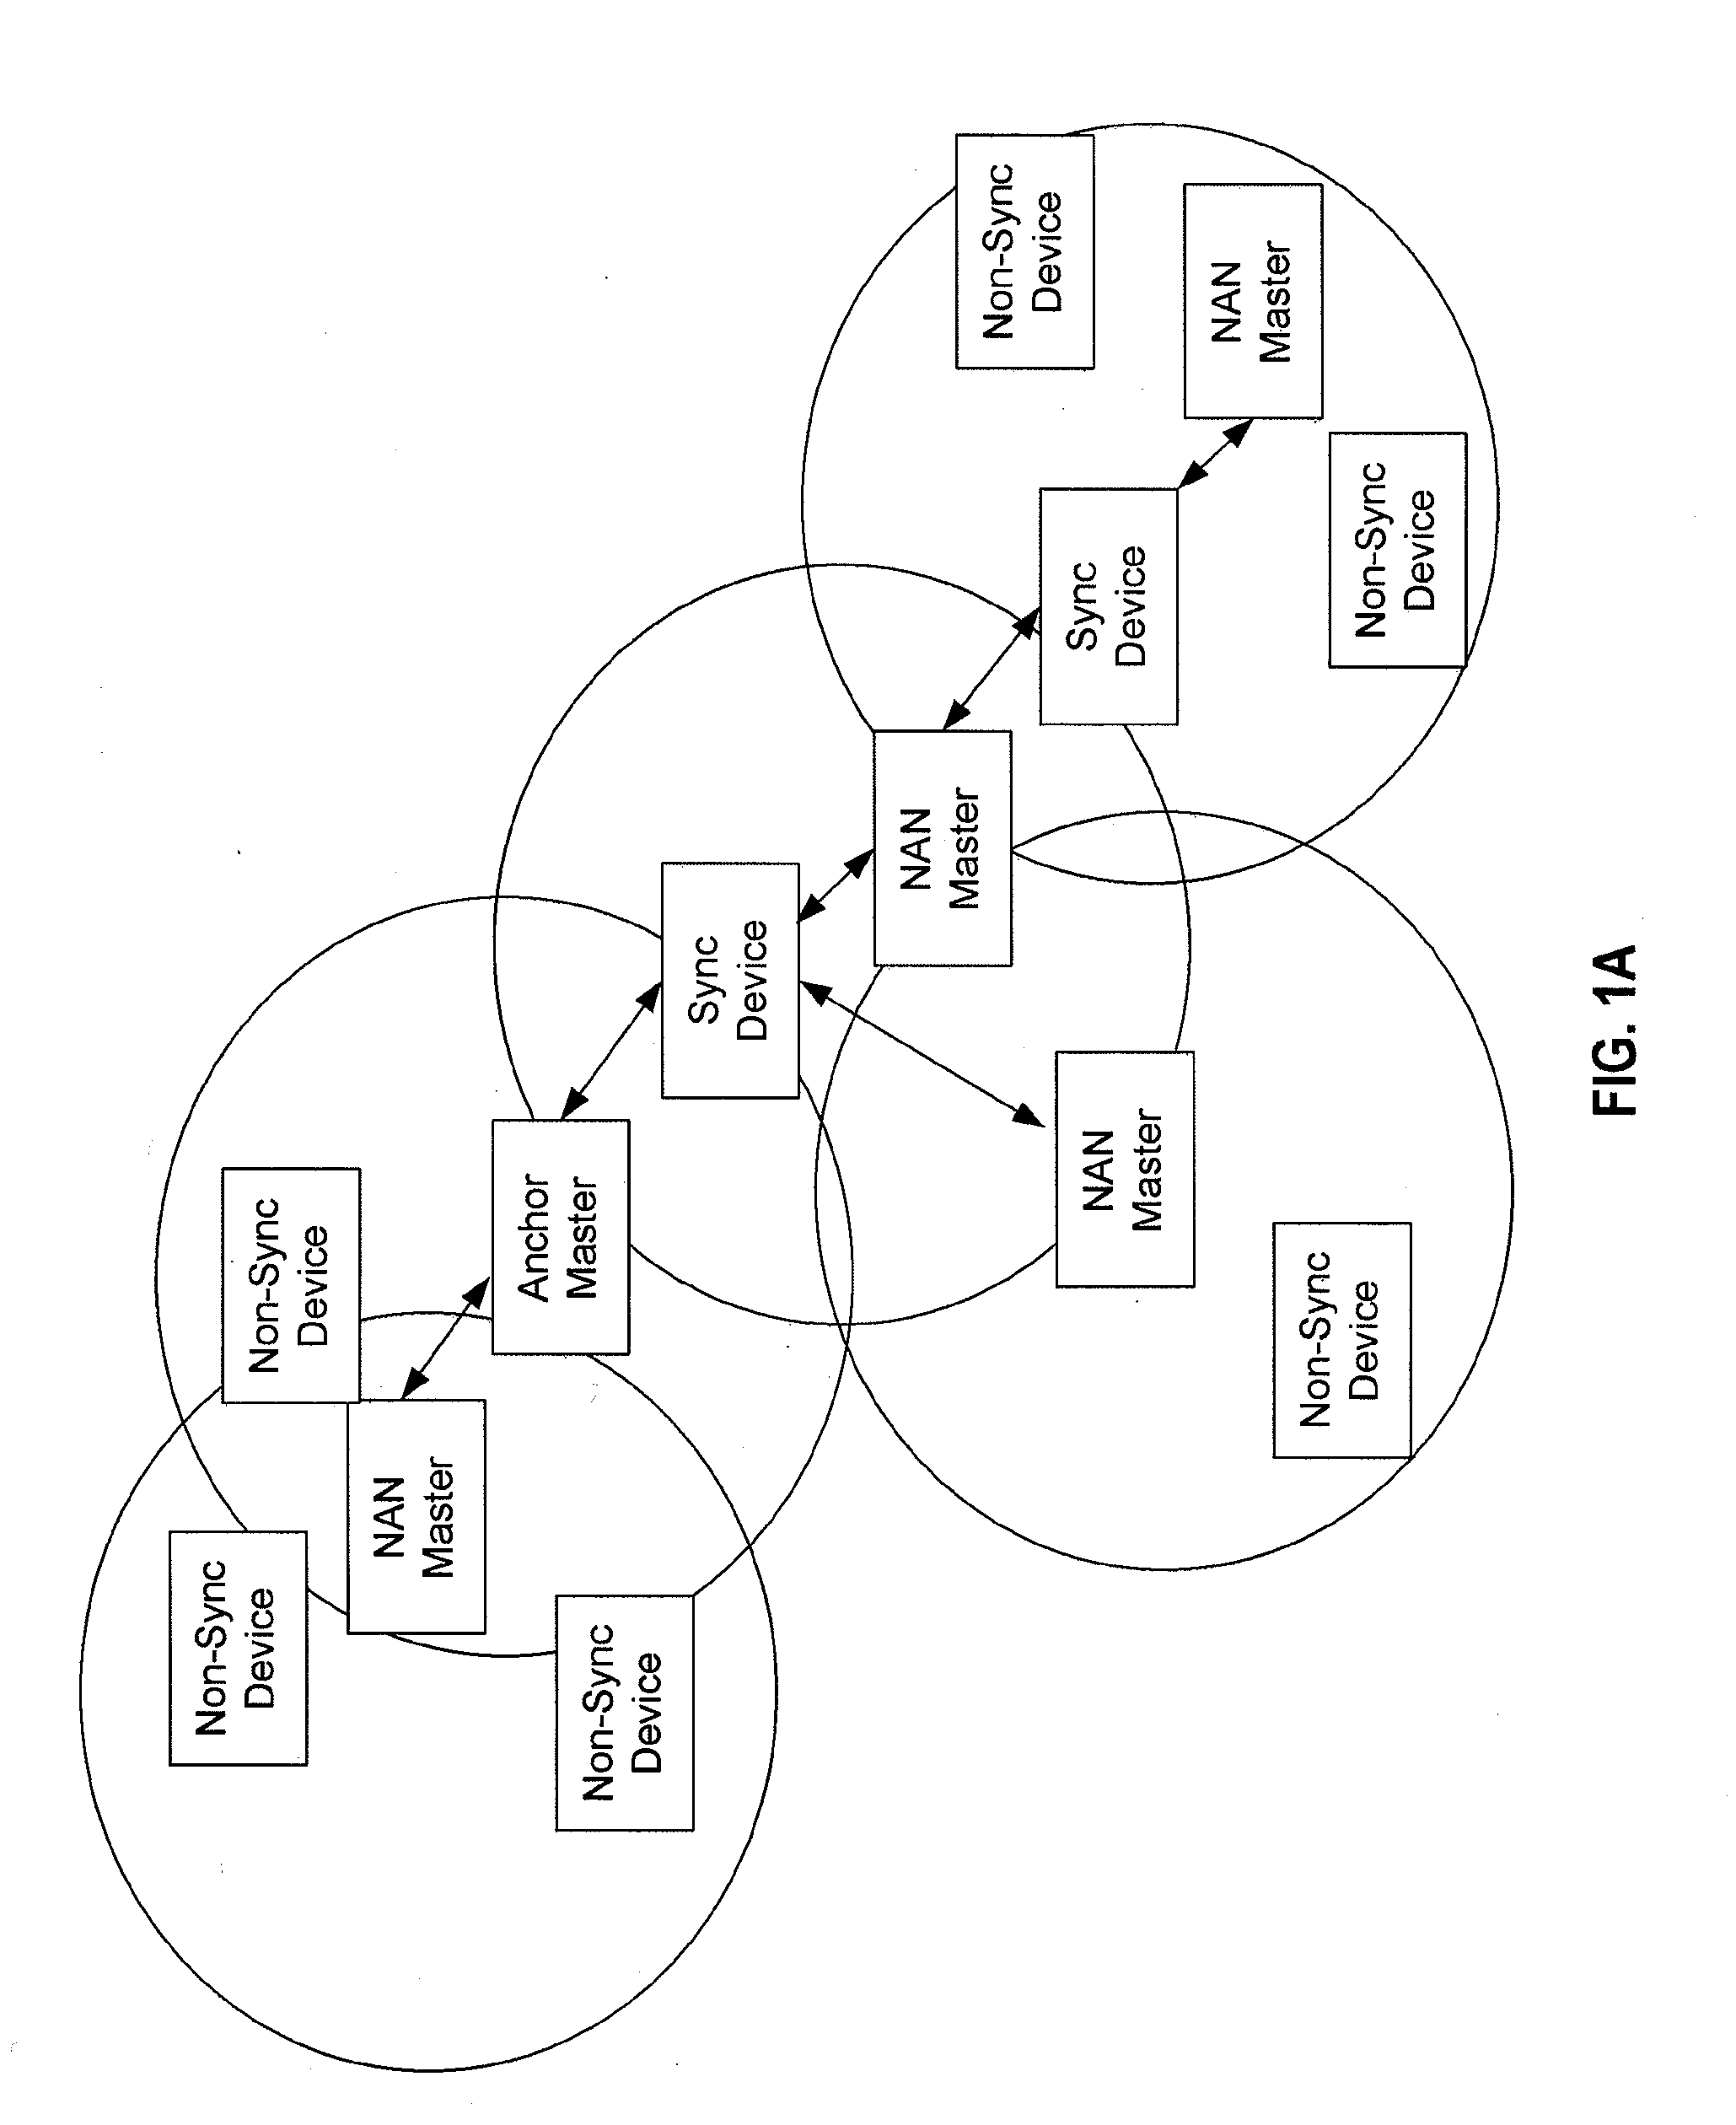 SYSTEMS AND METHODS FOR ESTABLISHING SYNCHRONIZATION ACROSS MULTIPLE NETWORKS AND PARTICIPATING STAs VIA OPERATIONS ON A KNOWN COMMON CHANNEL